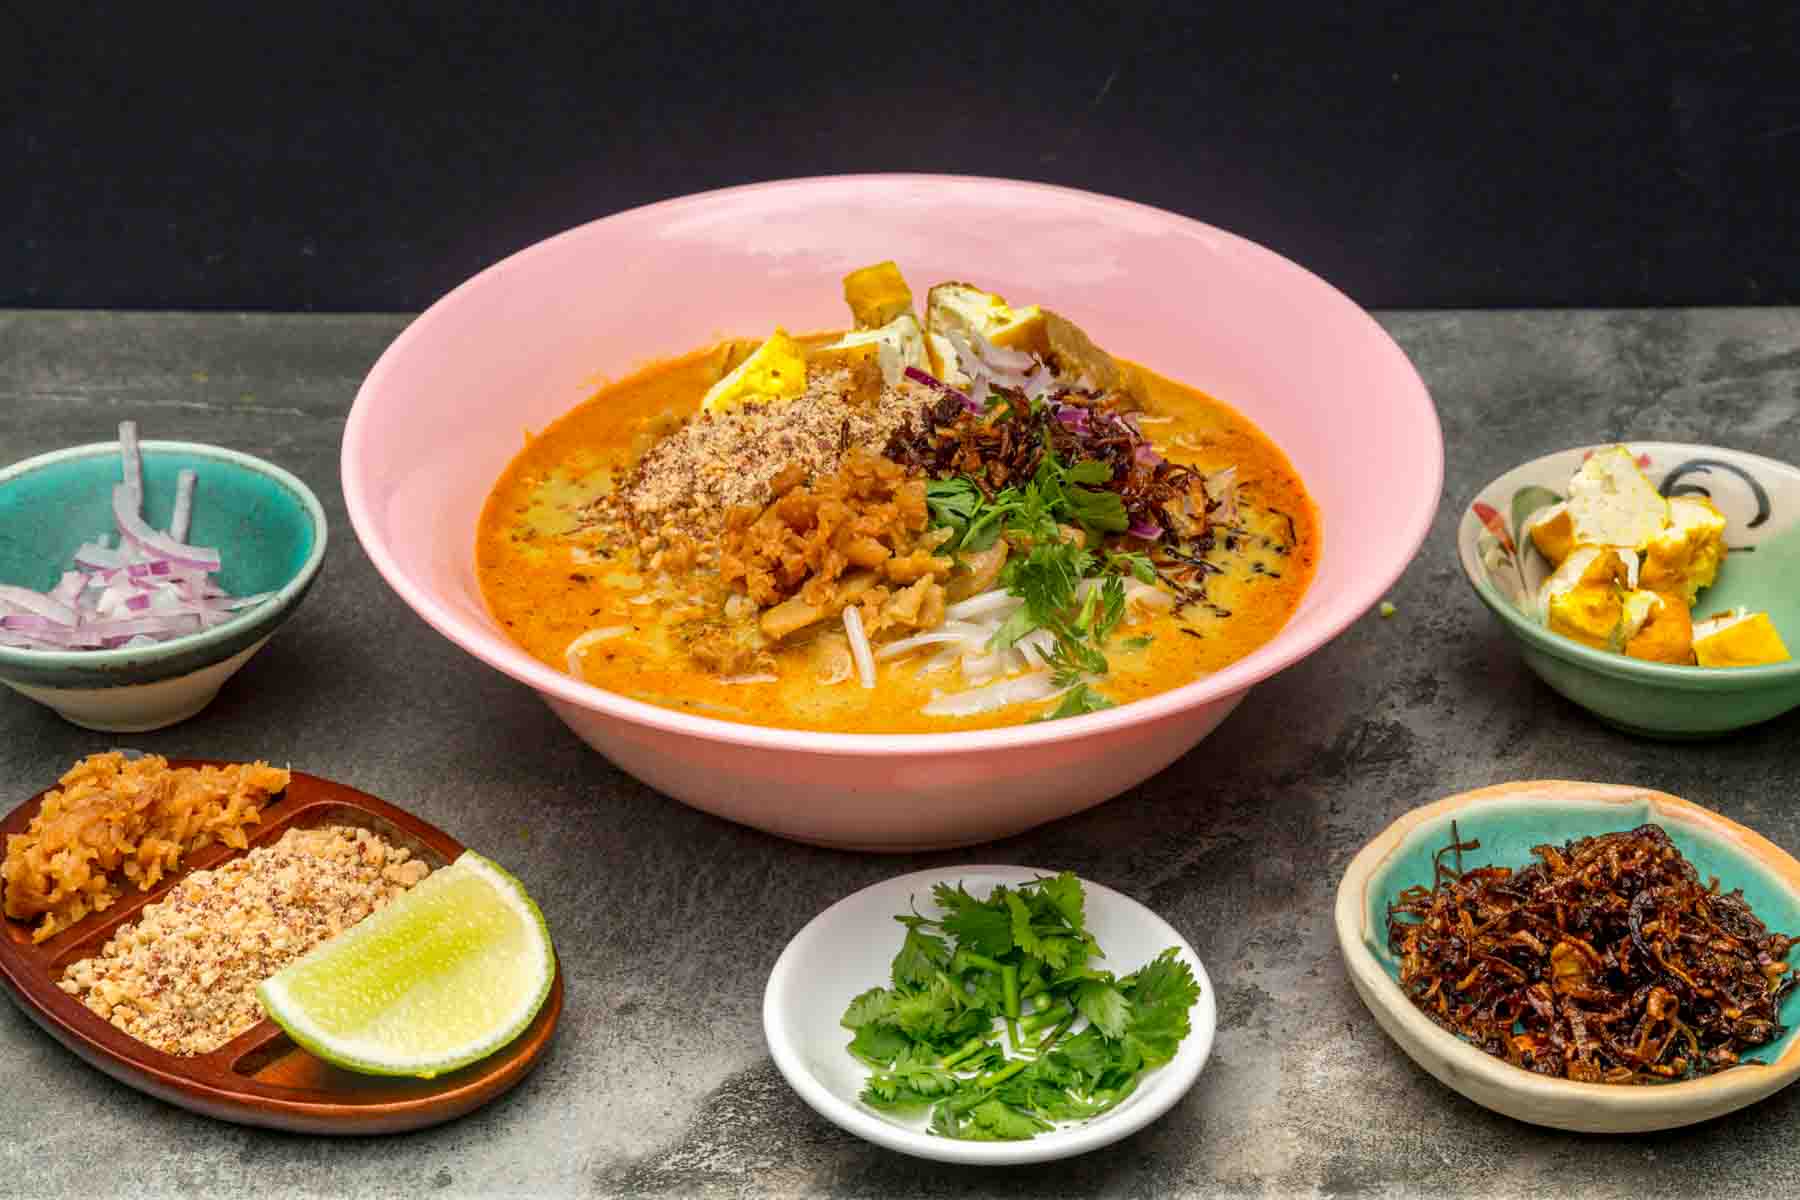 pink melamine bowl filled with orange coloured curry. Some noodles are visible underneath the heaped toppings comprised of cubes of fried tofu, ground peanut, preserved radish, fried shallots, coriander, and sliced shallot.